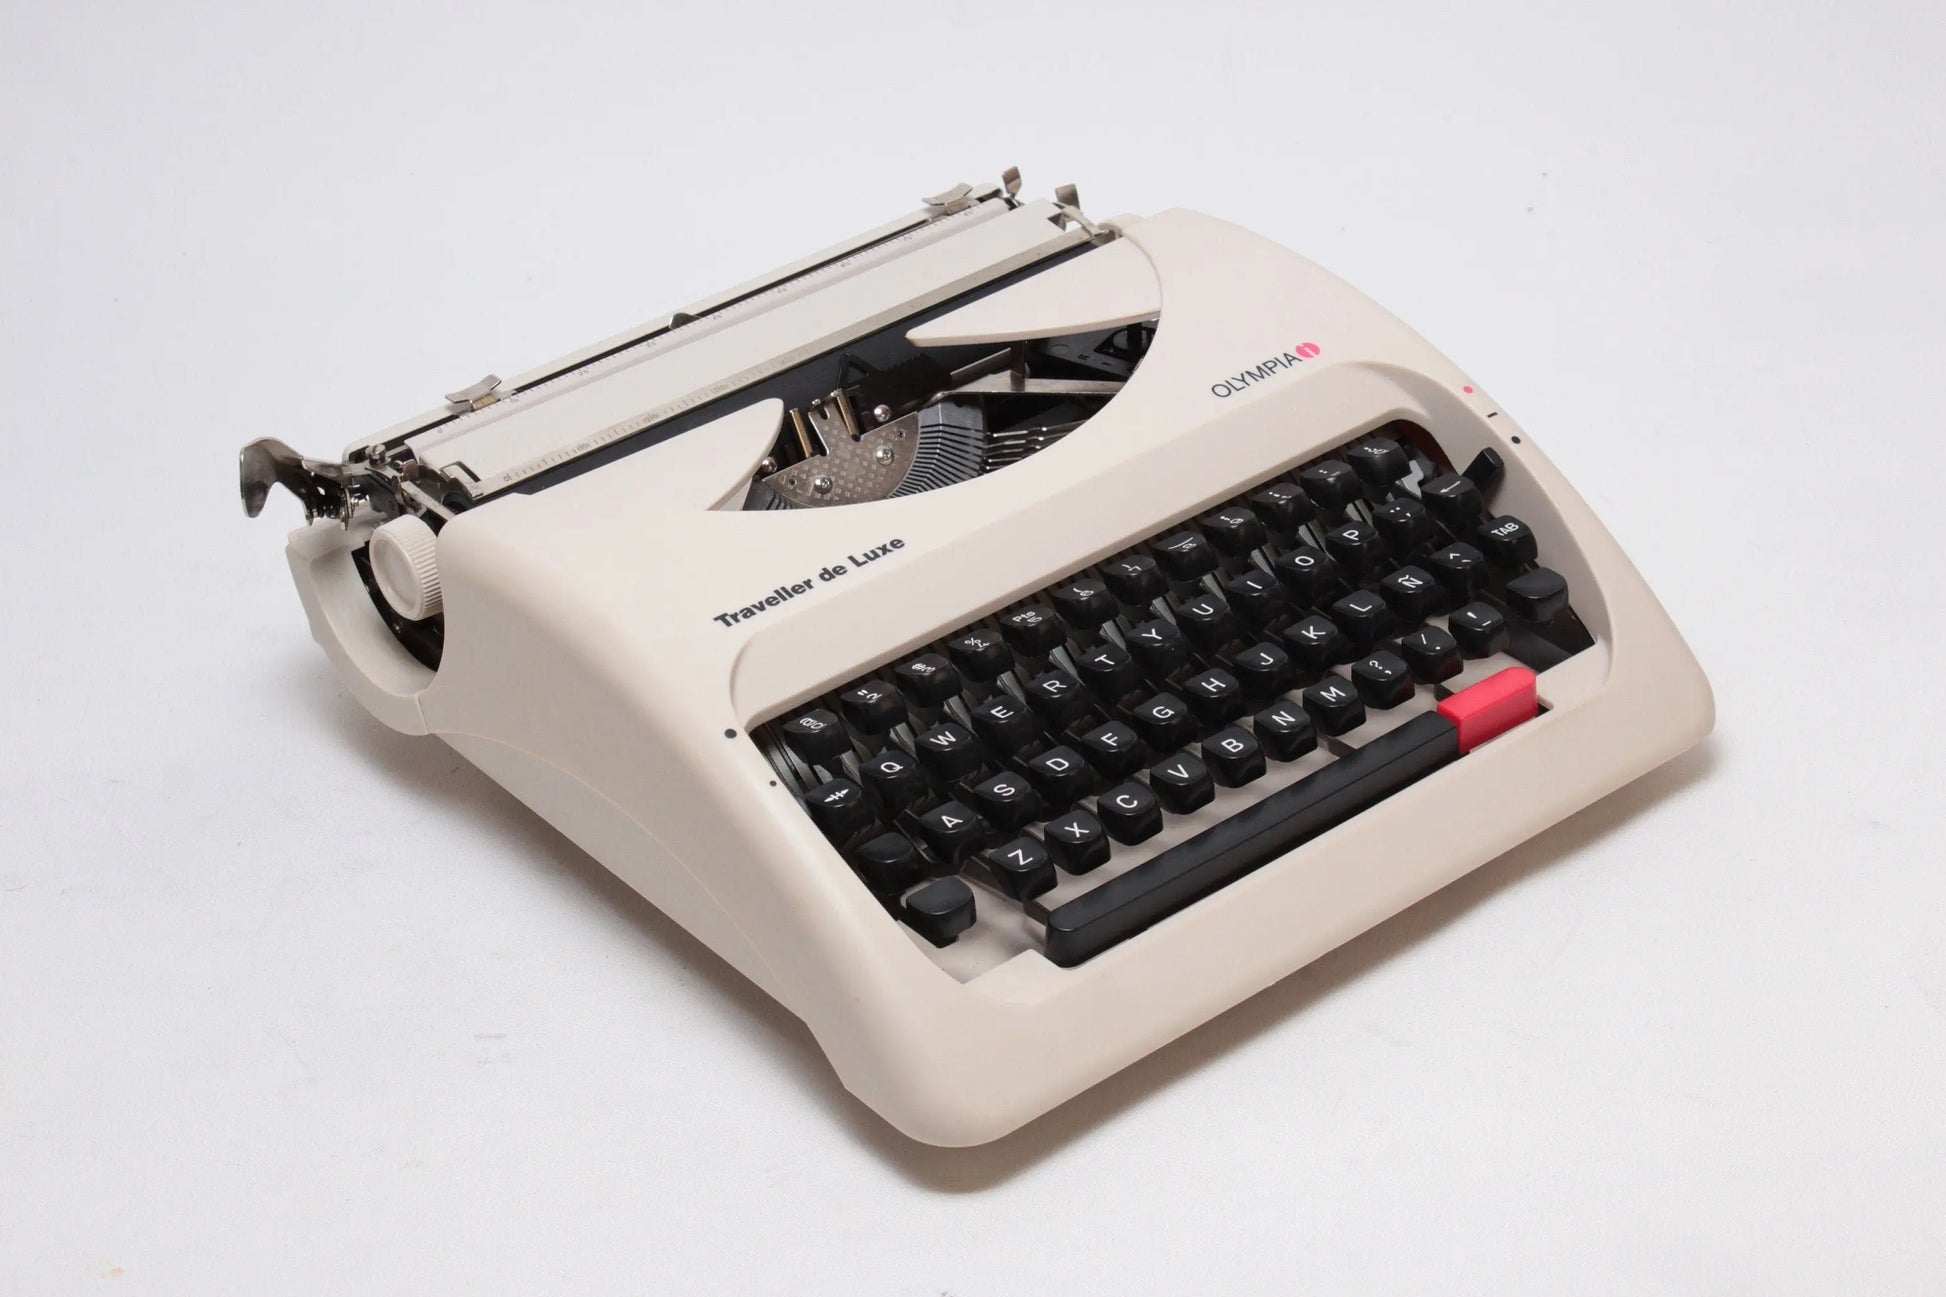 Modern Olympia Traveller De Luxe Light Beige Typewriter, Vintage, Manual Portable, Professionally Serviced by Typewriter.Company - ElGranero Typewriter.Company